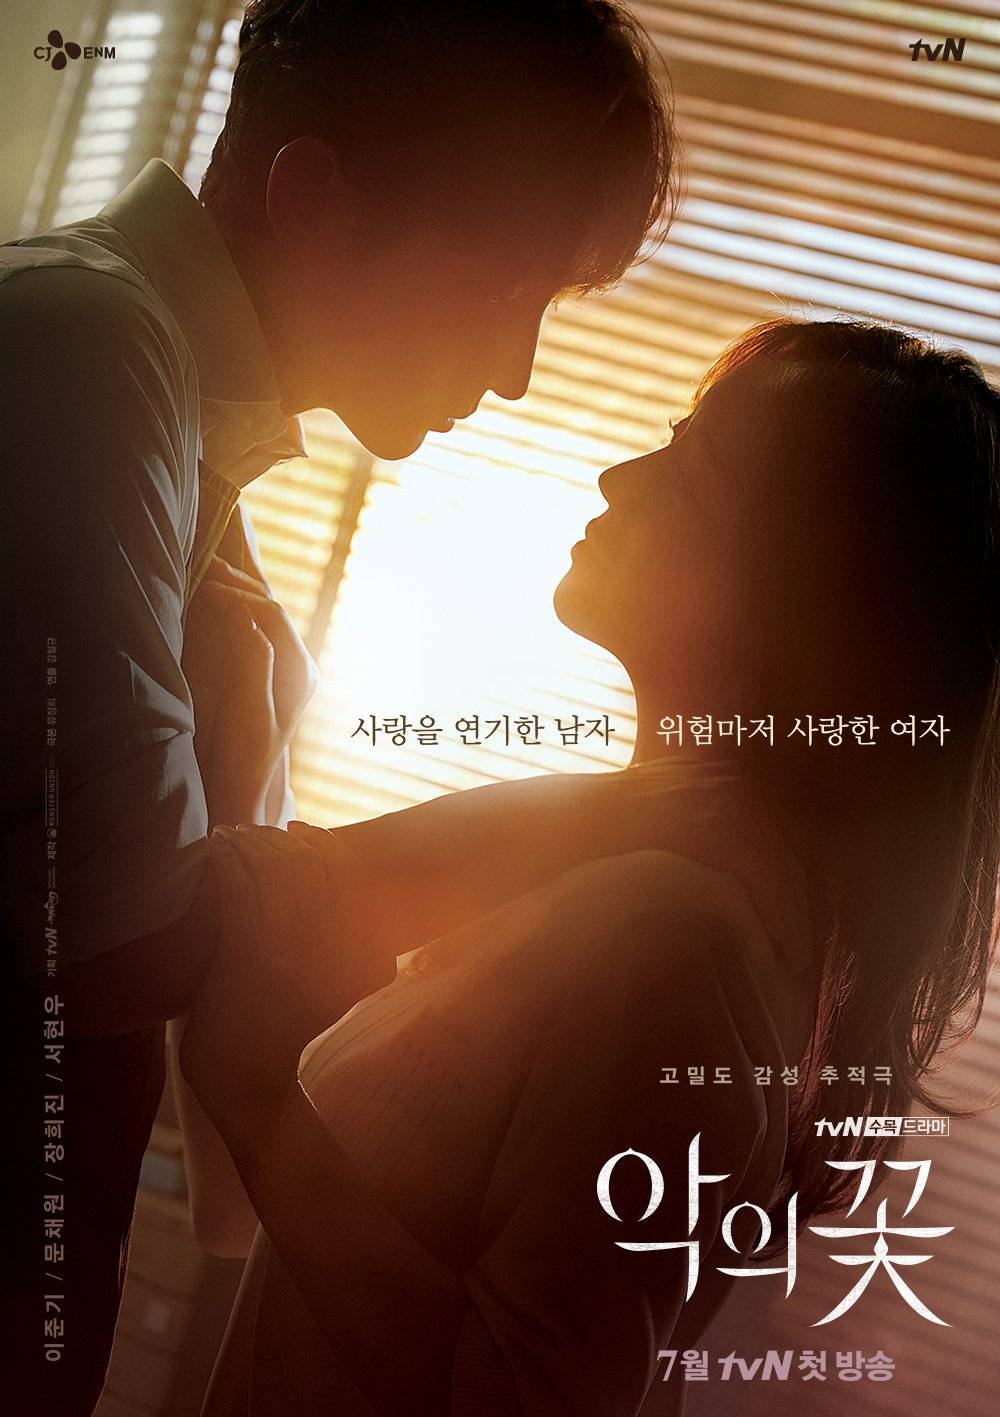 Lee Joon Gi And Moon Chae Wons Flower Of Evil Releases Main Posters Hancinema The Korean 6561